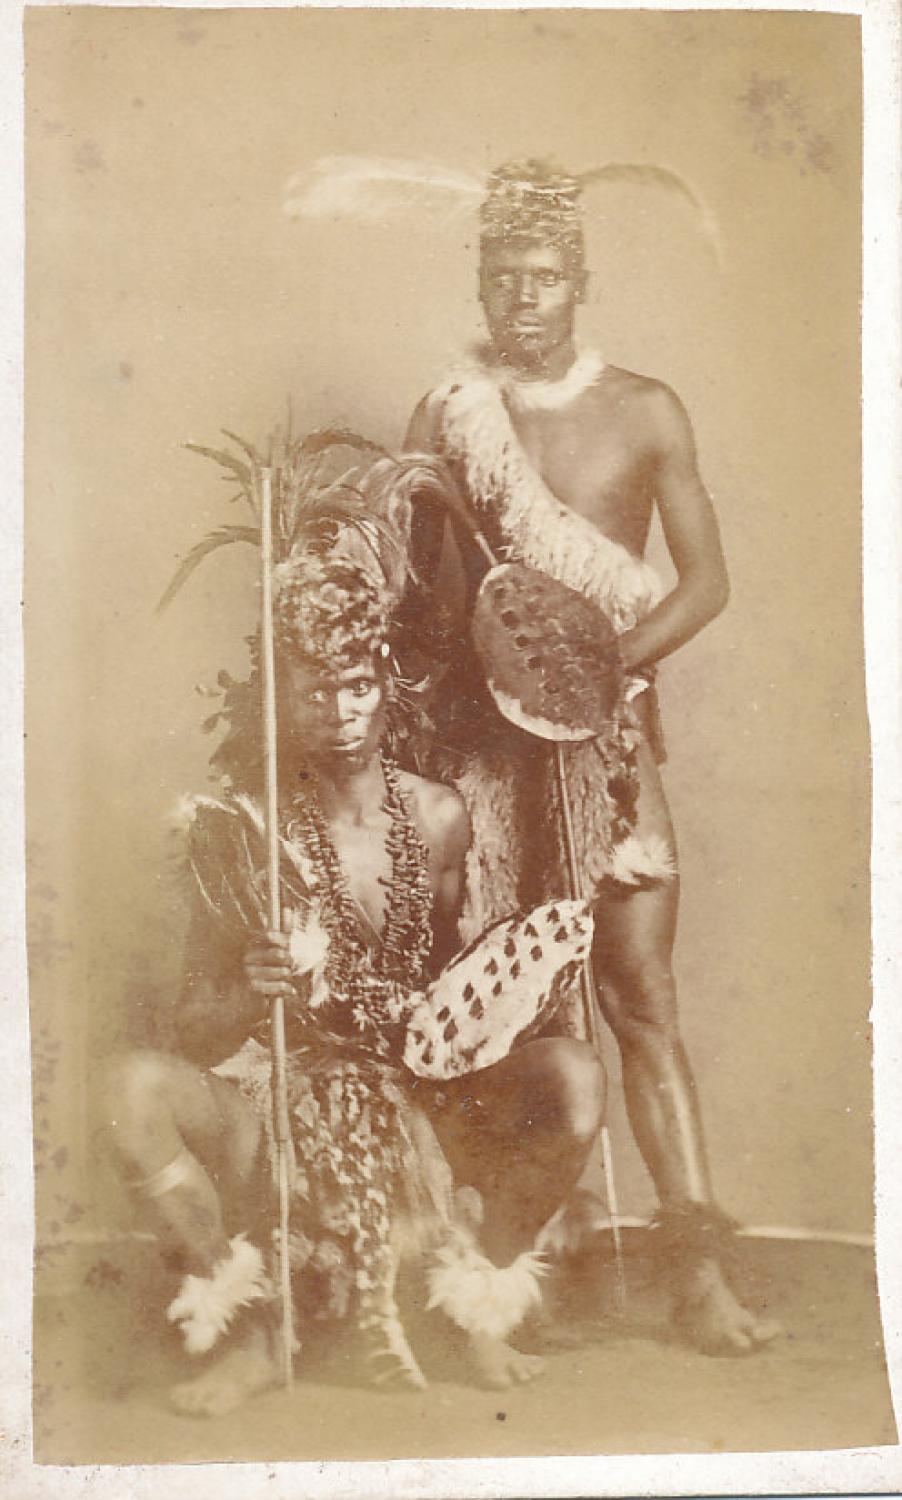 Zulu Warriors Carry Shield and Spears C1870